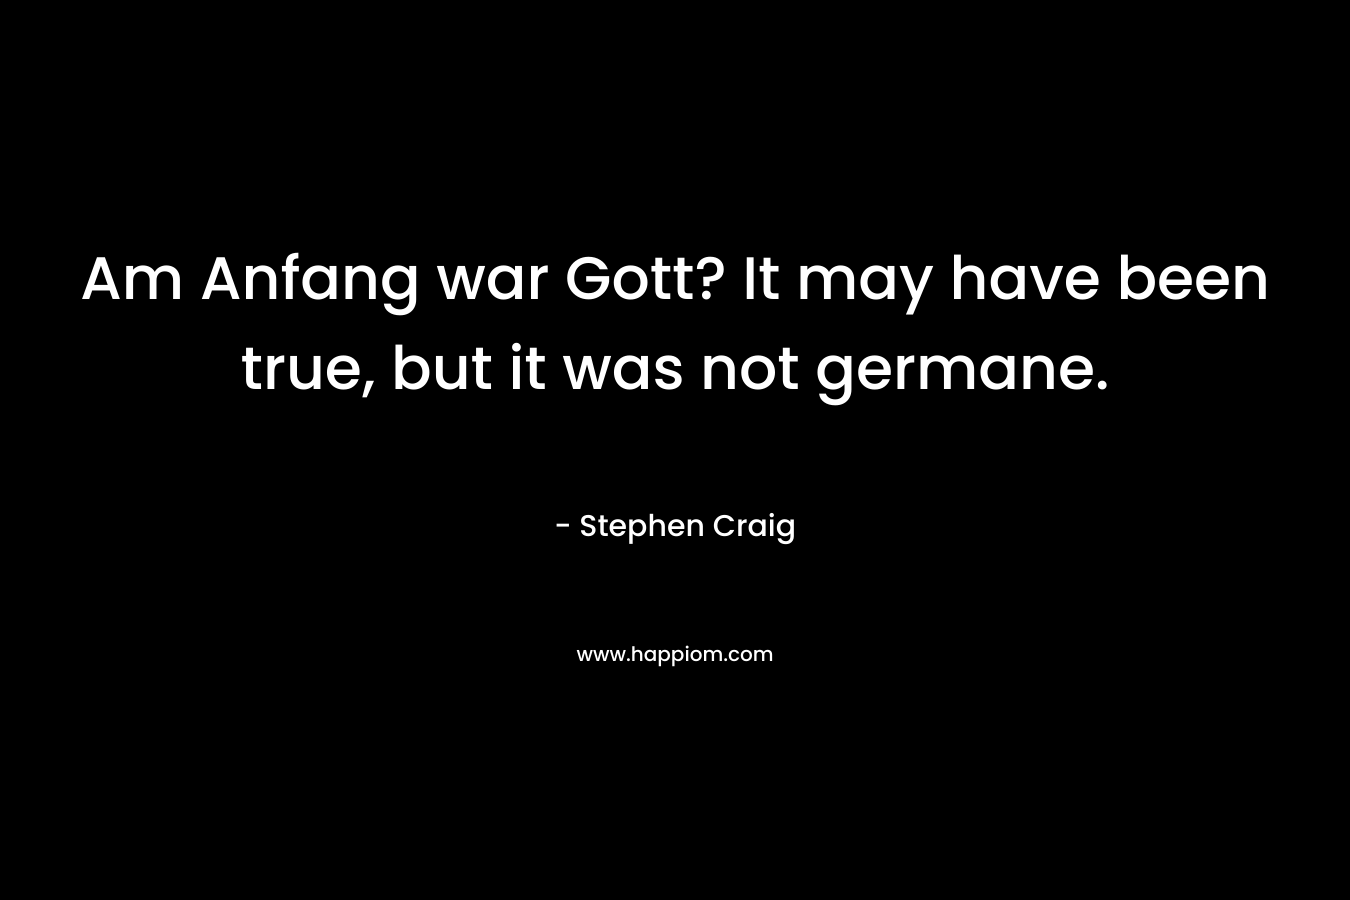 Am Anfang war Gott? It may have been true, but it was not germane.